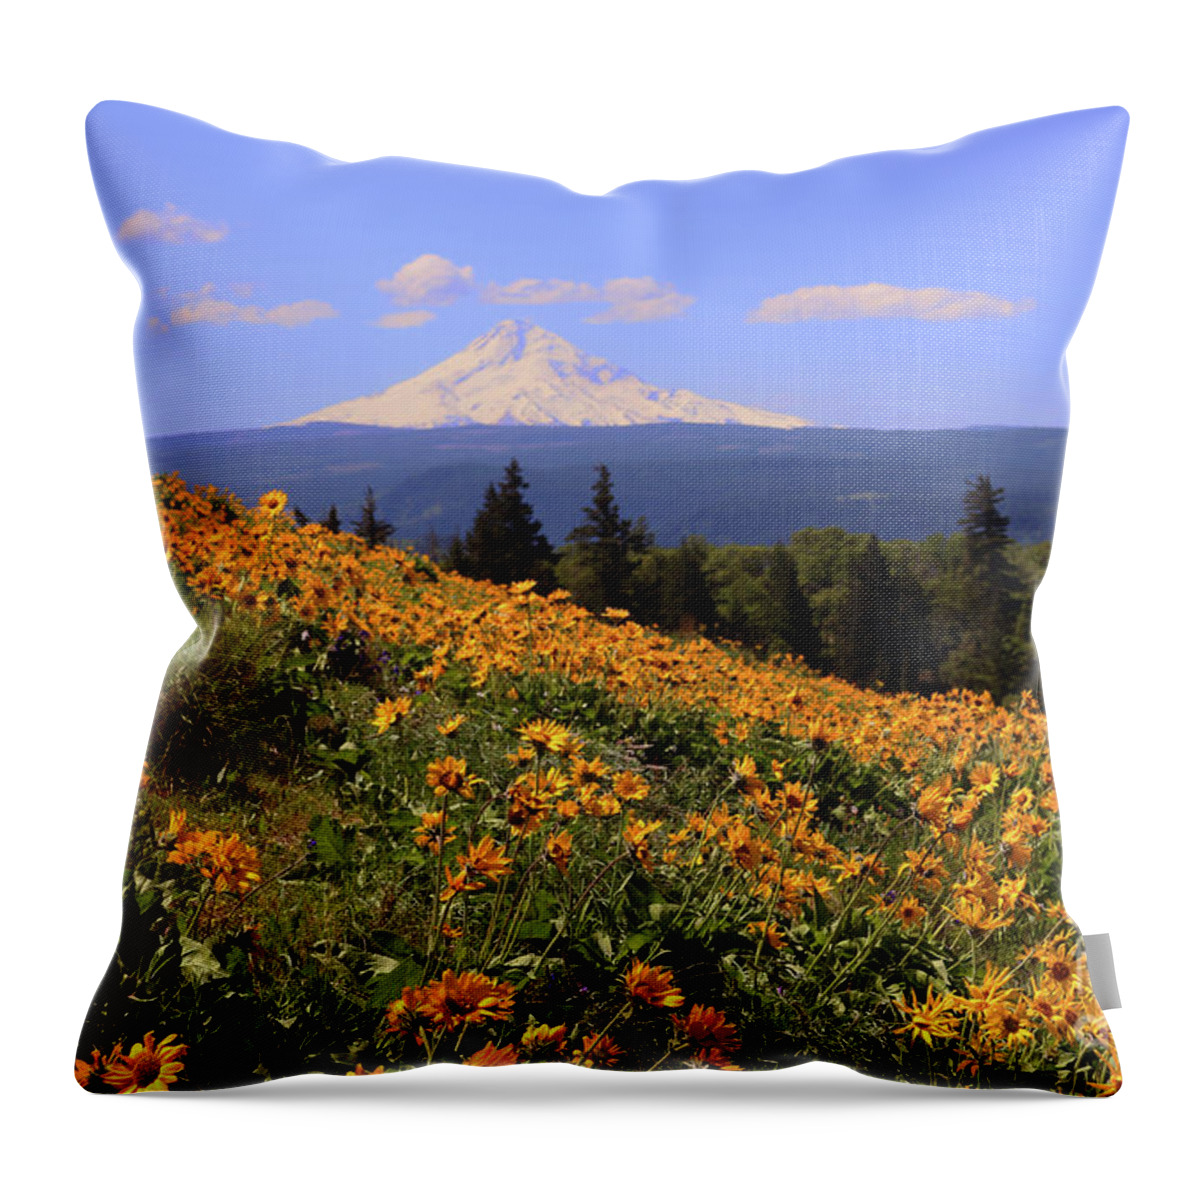 Oak Tree Throw Pillow featuring the photograph Mt. Hood, Rowena Crest by Jeanette French